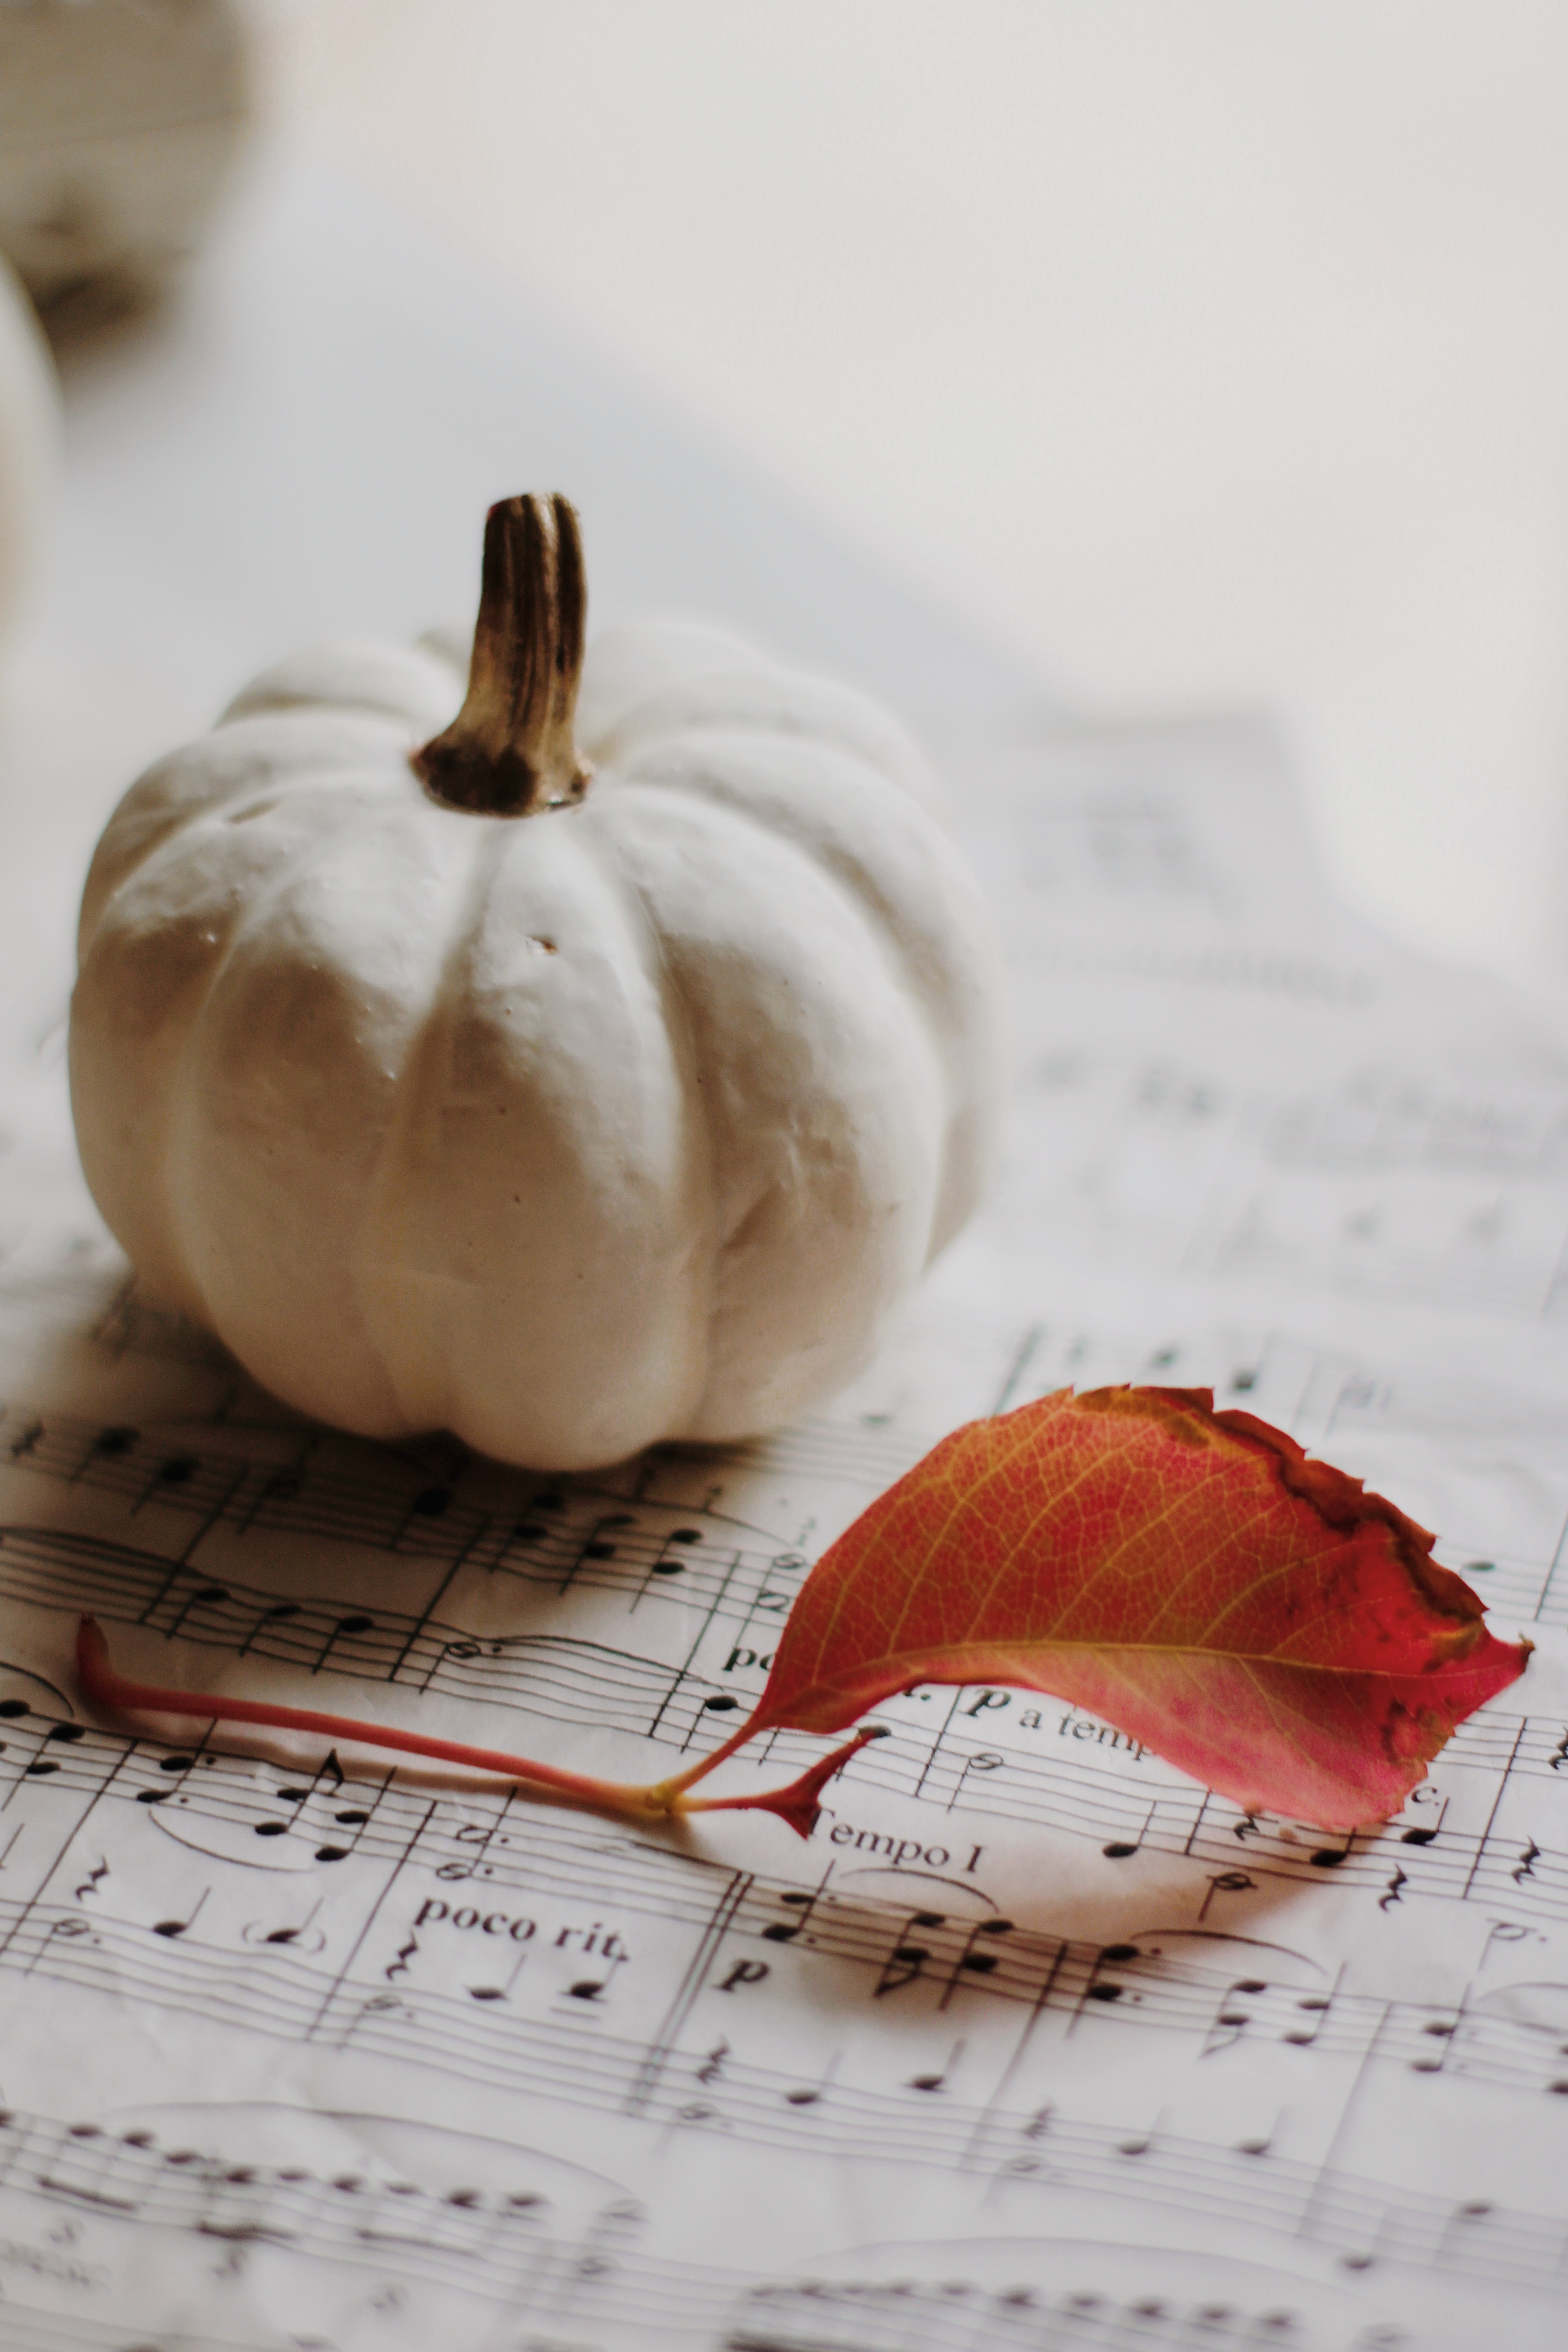 75458 Screensavers and Wallpapers Notes for phone. Download music, autumn, pumpkin, miscellanea, miscellaneous, sheet, leaf, notes pictures for free